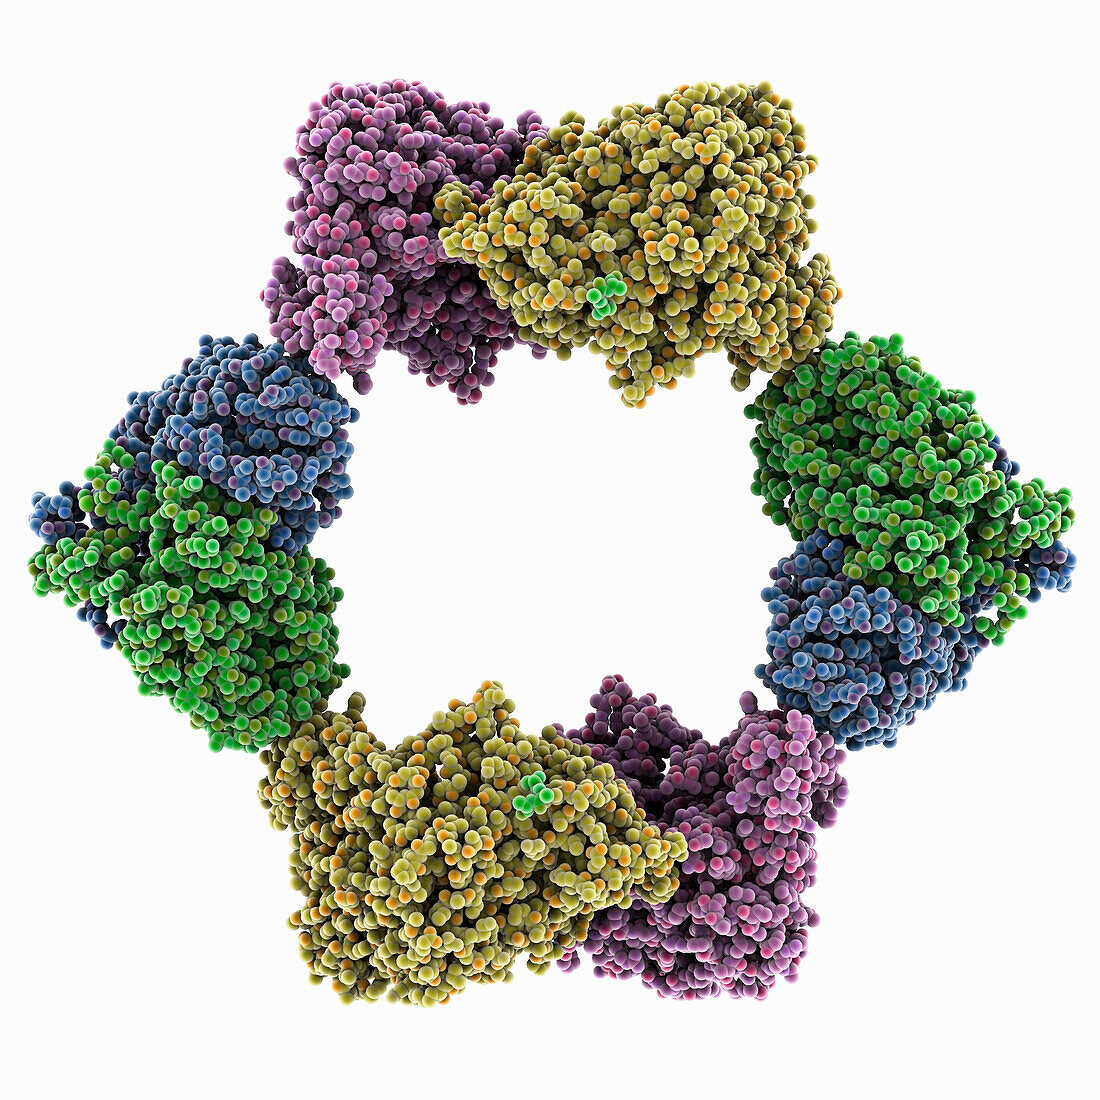 Reductase from Neisseria gonorrhoeae, molecular model